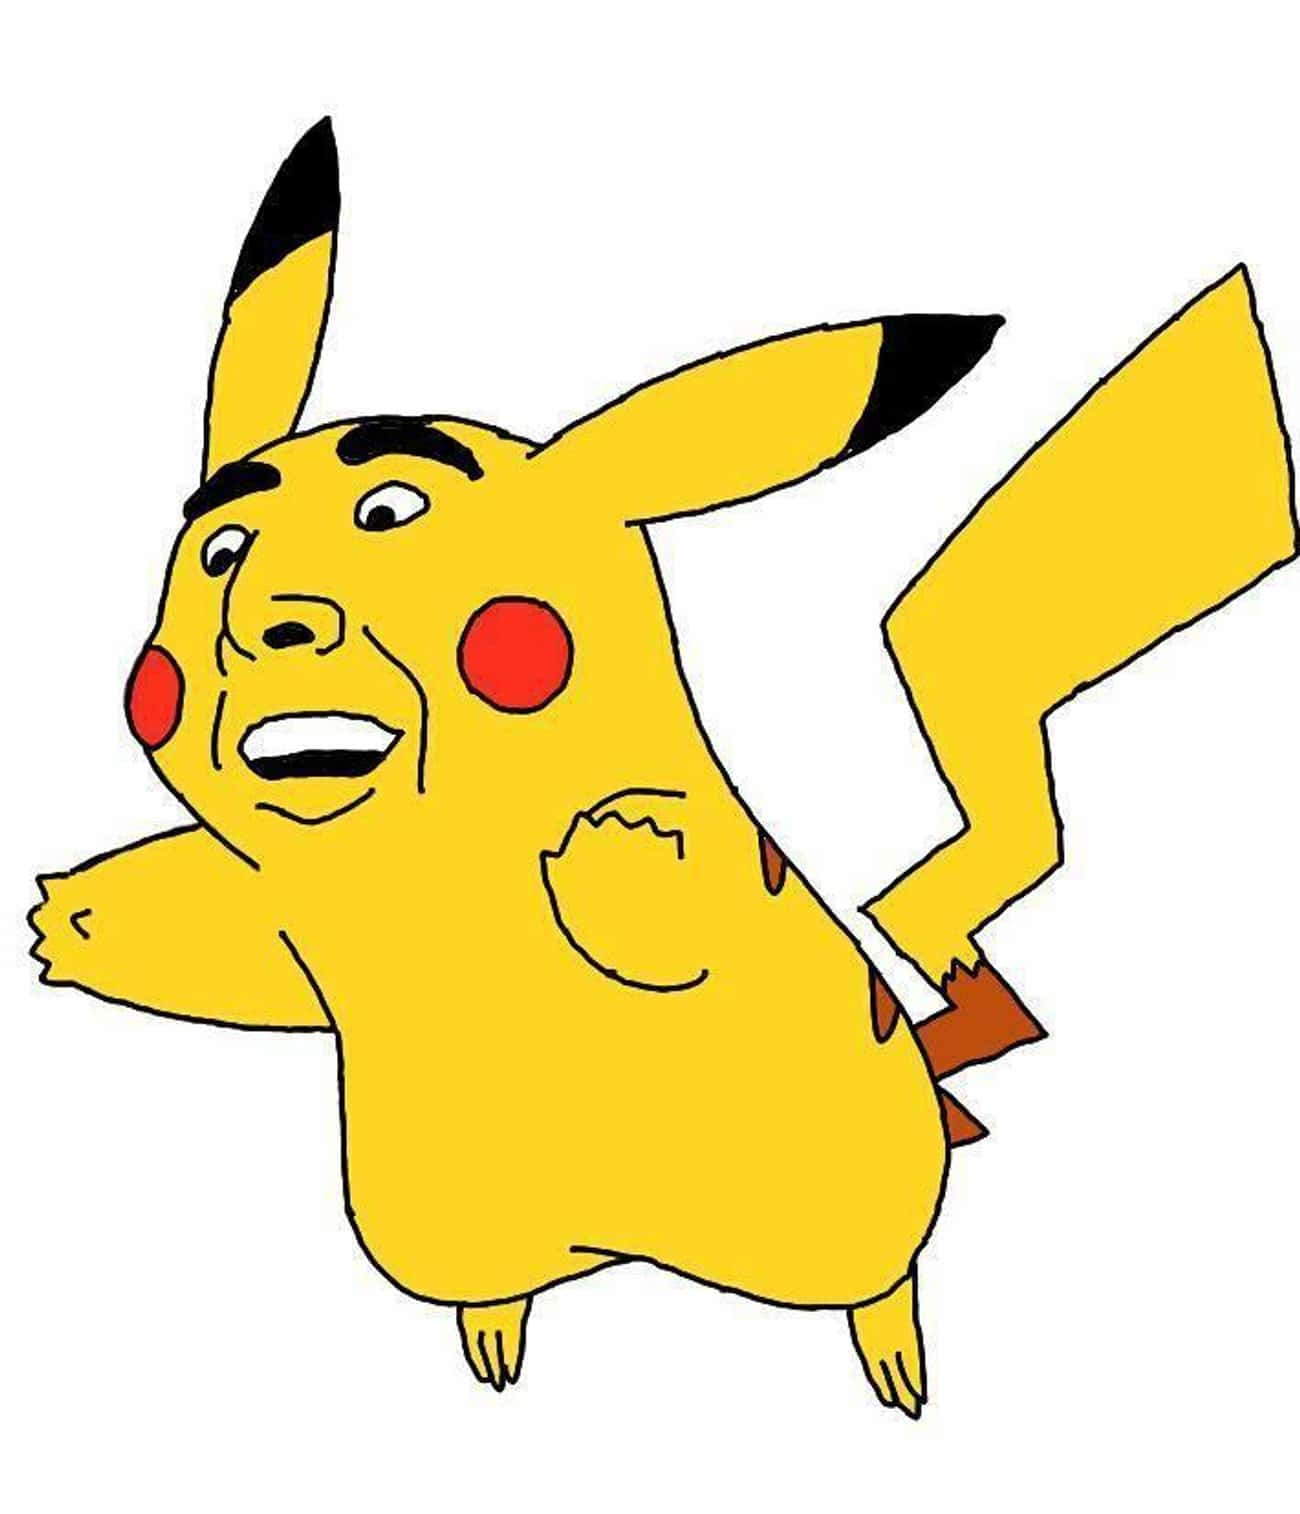 Pikachu Laughing Mischievously